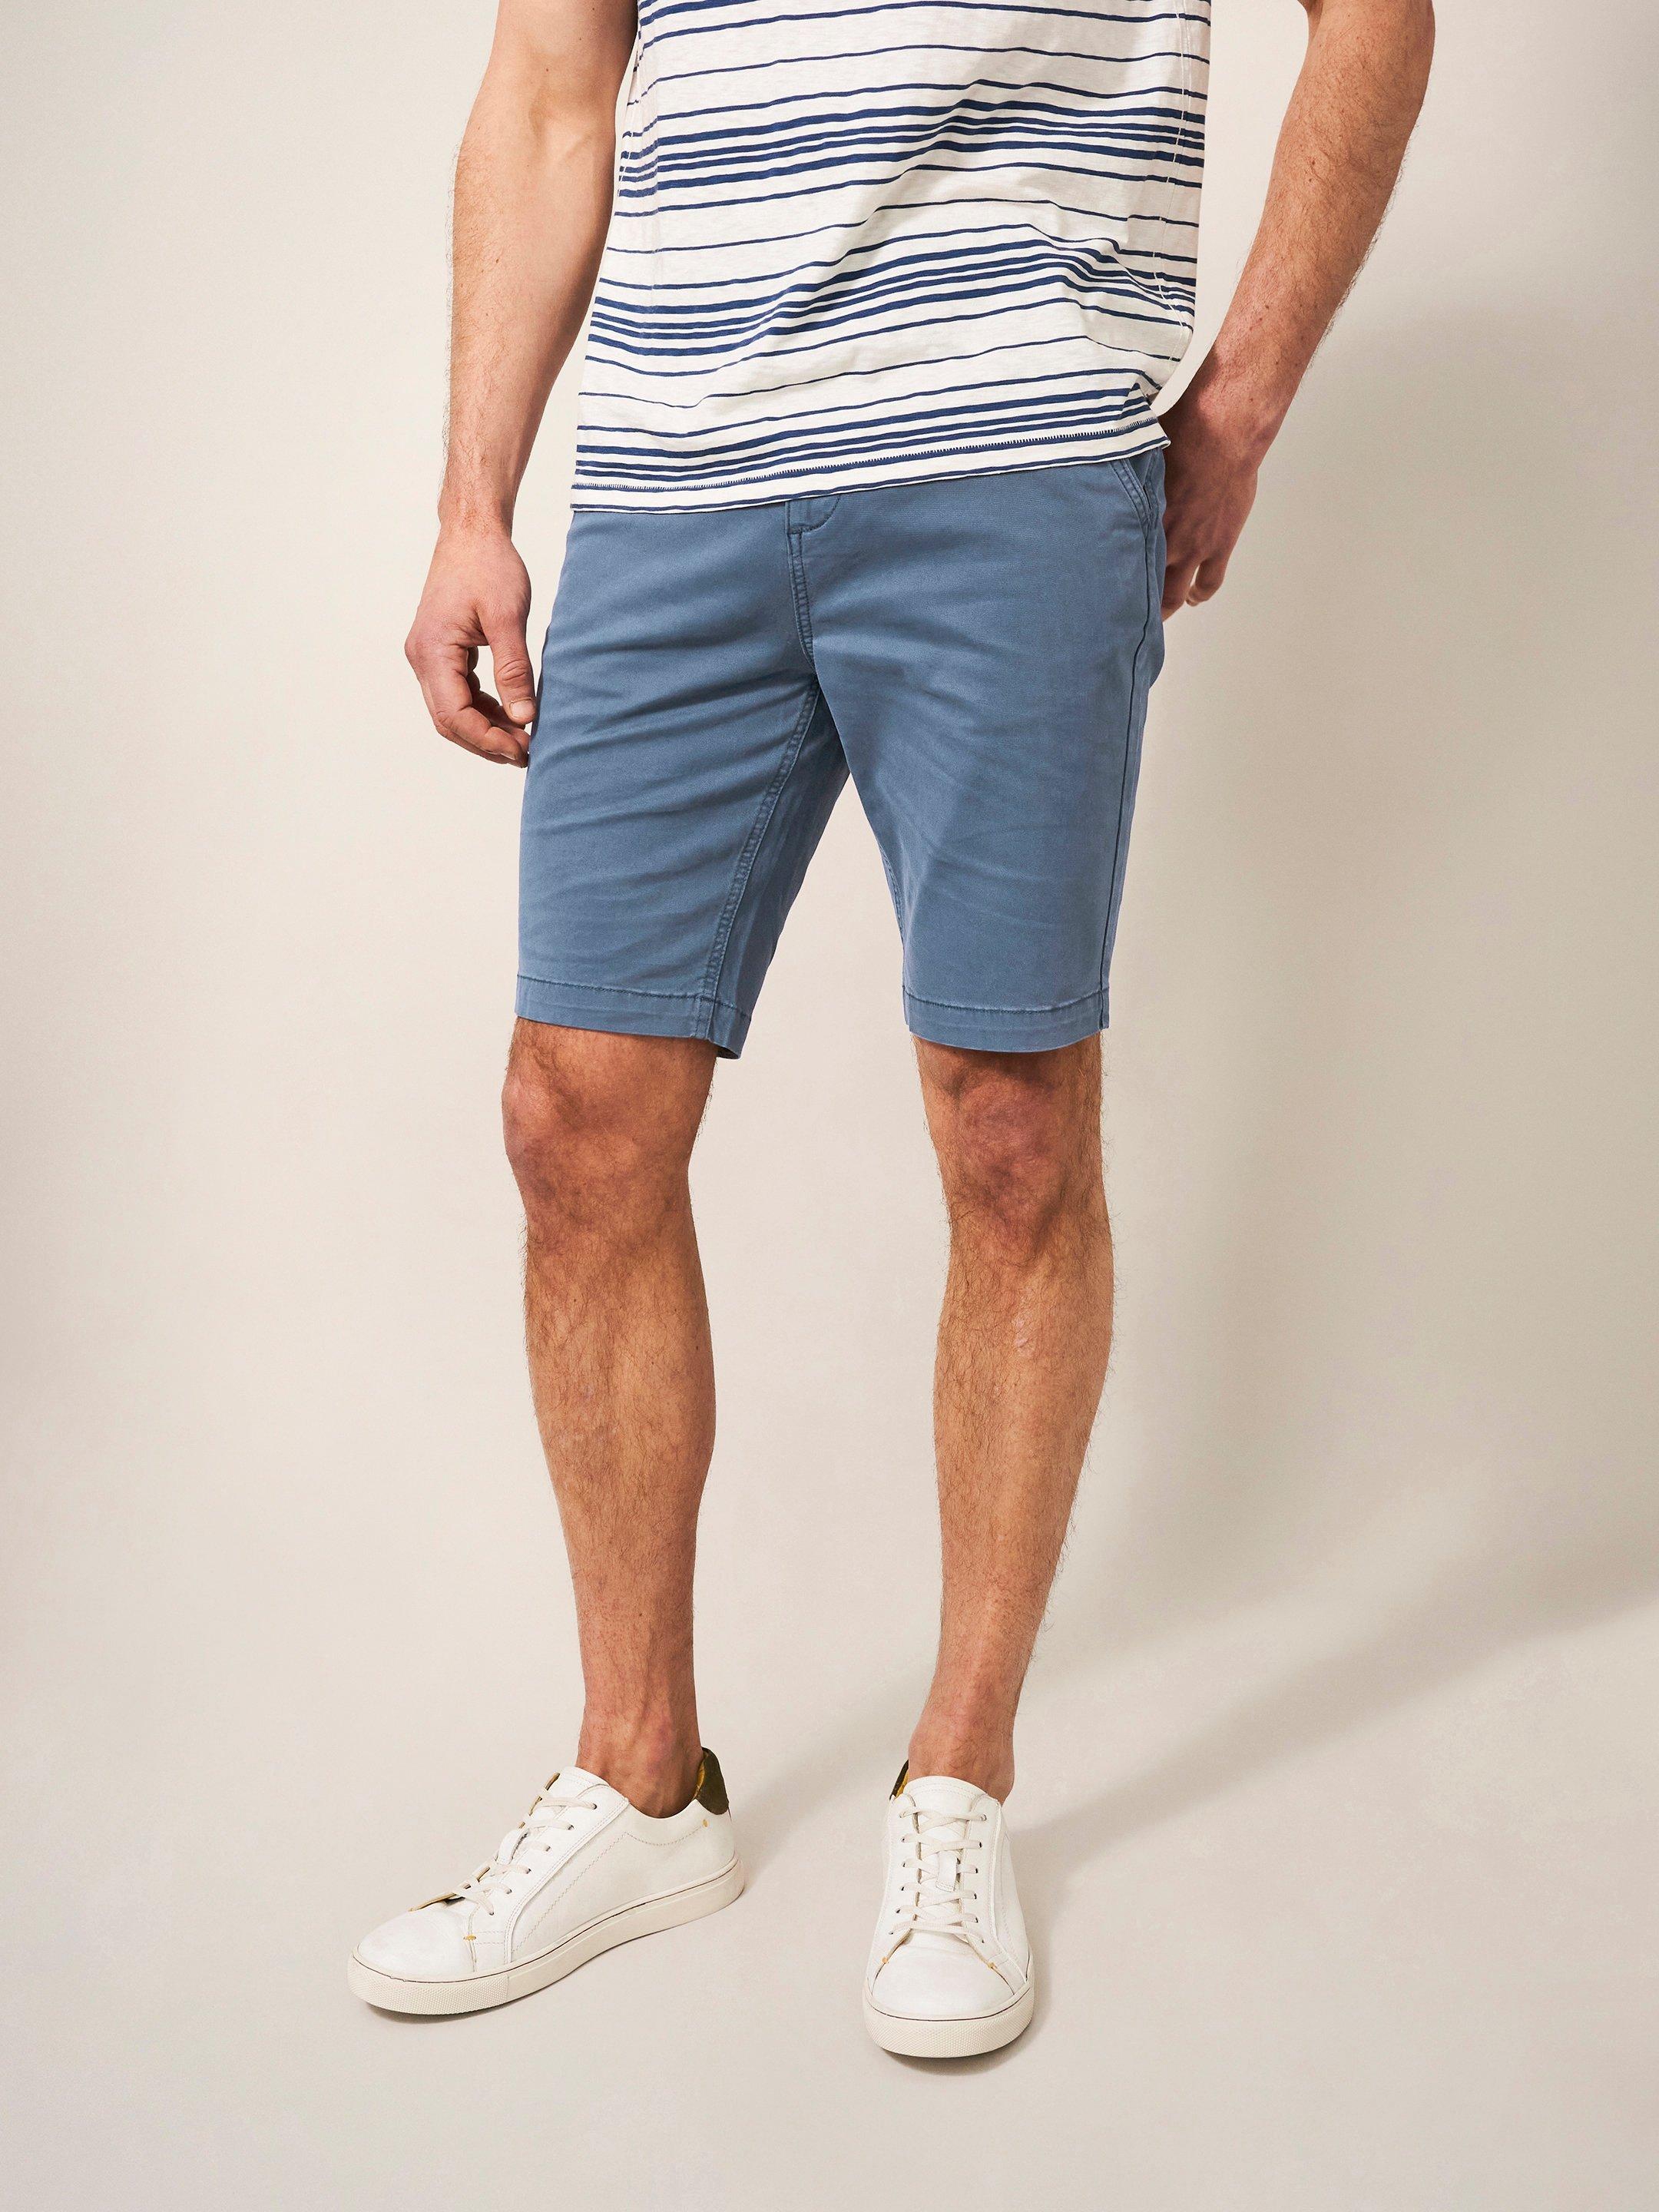 Sutton Slim Fit Chino Short in DEEP BLUE - MODEL FRONT